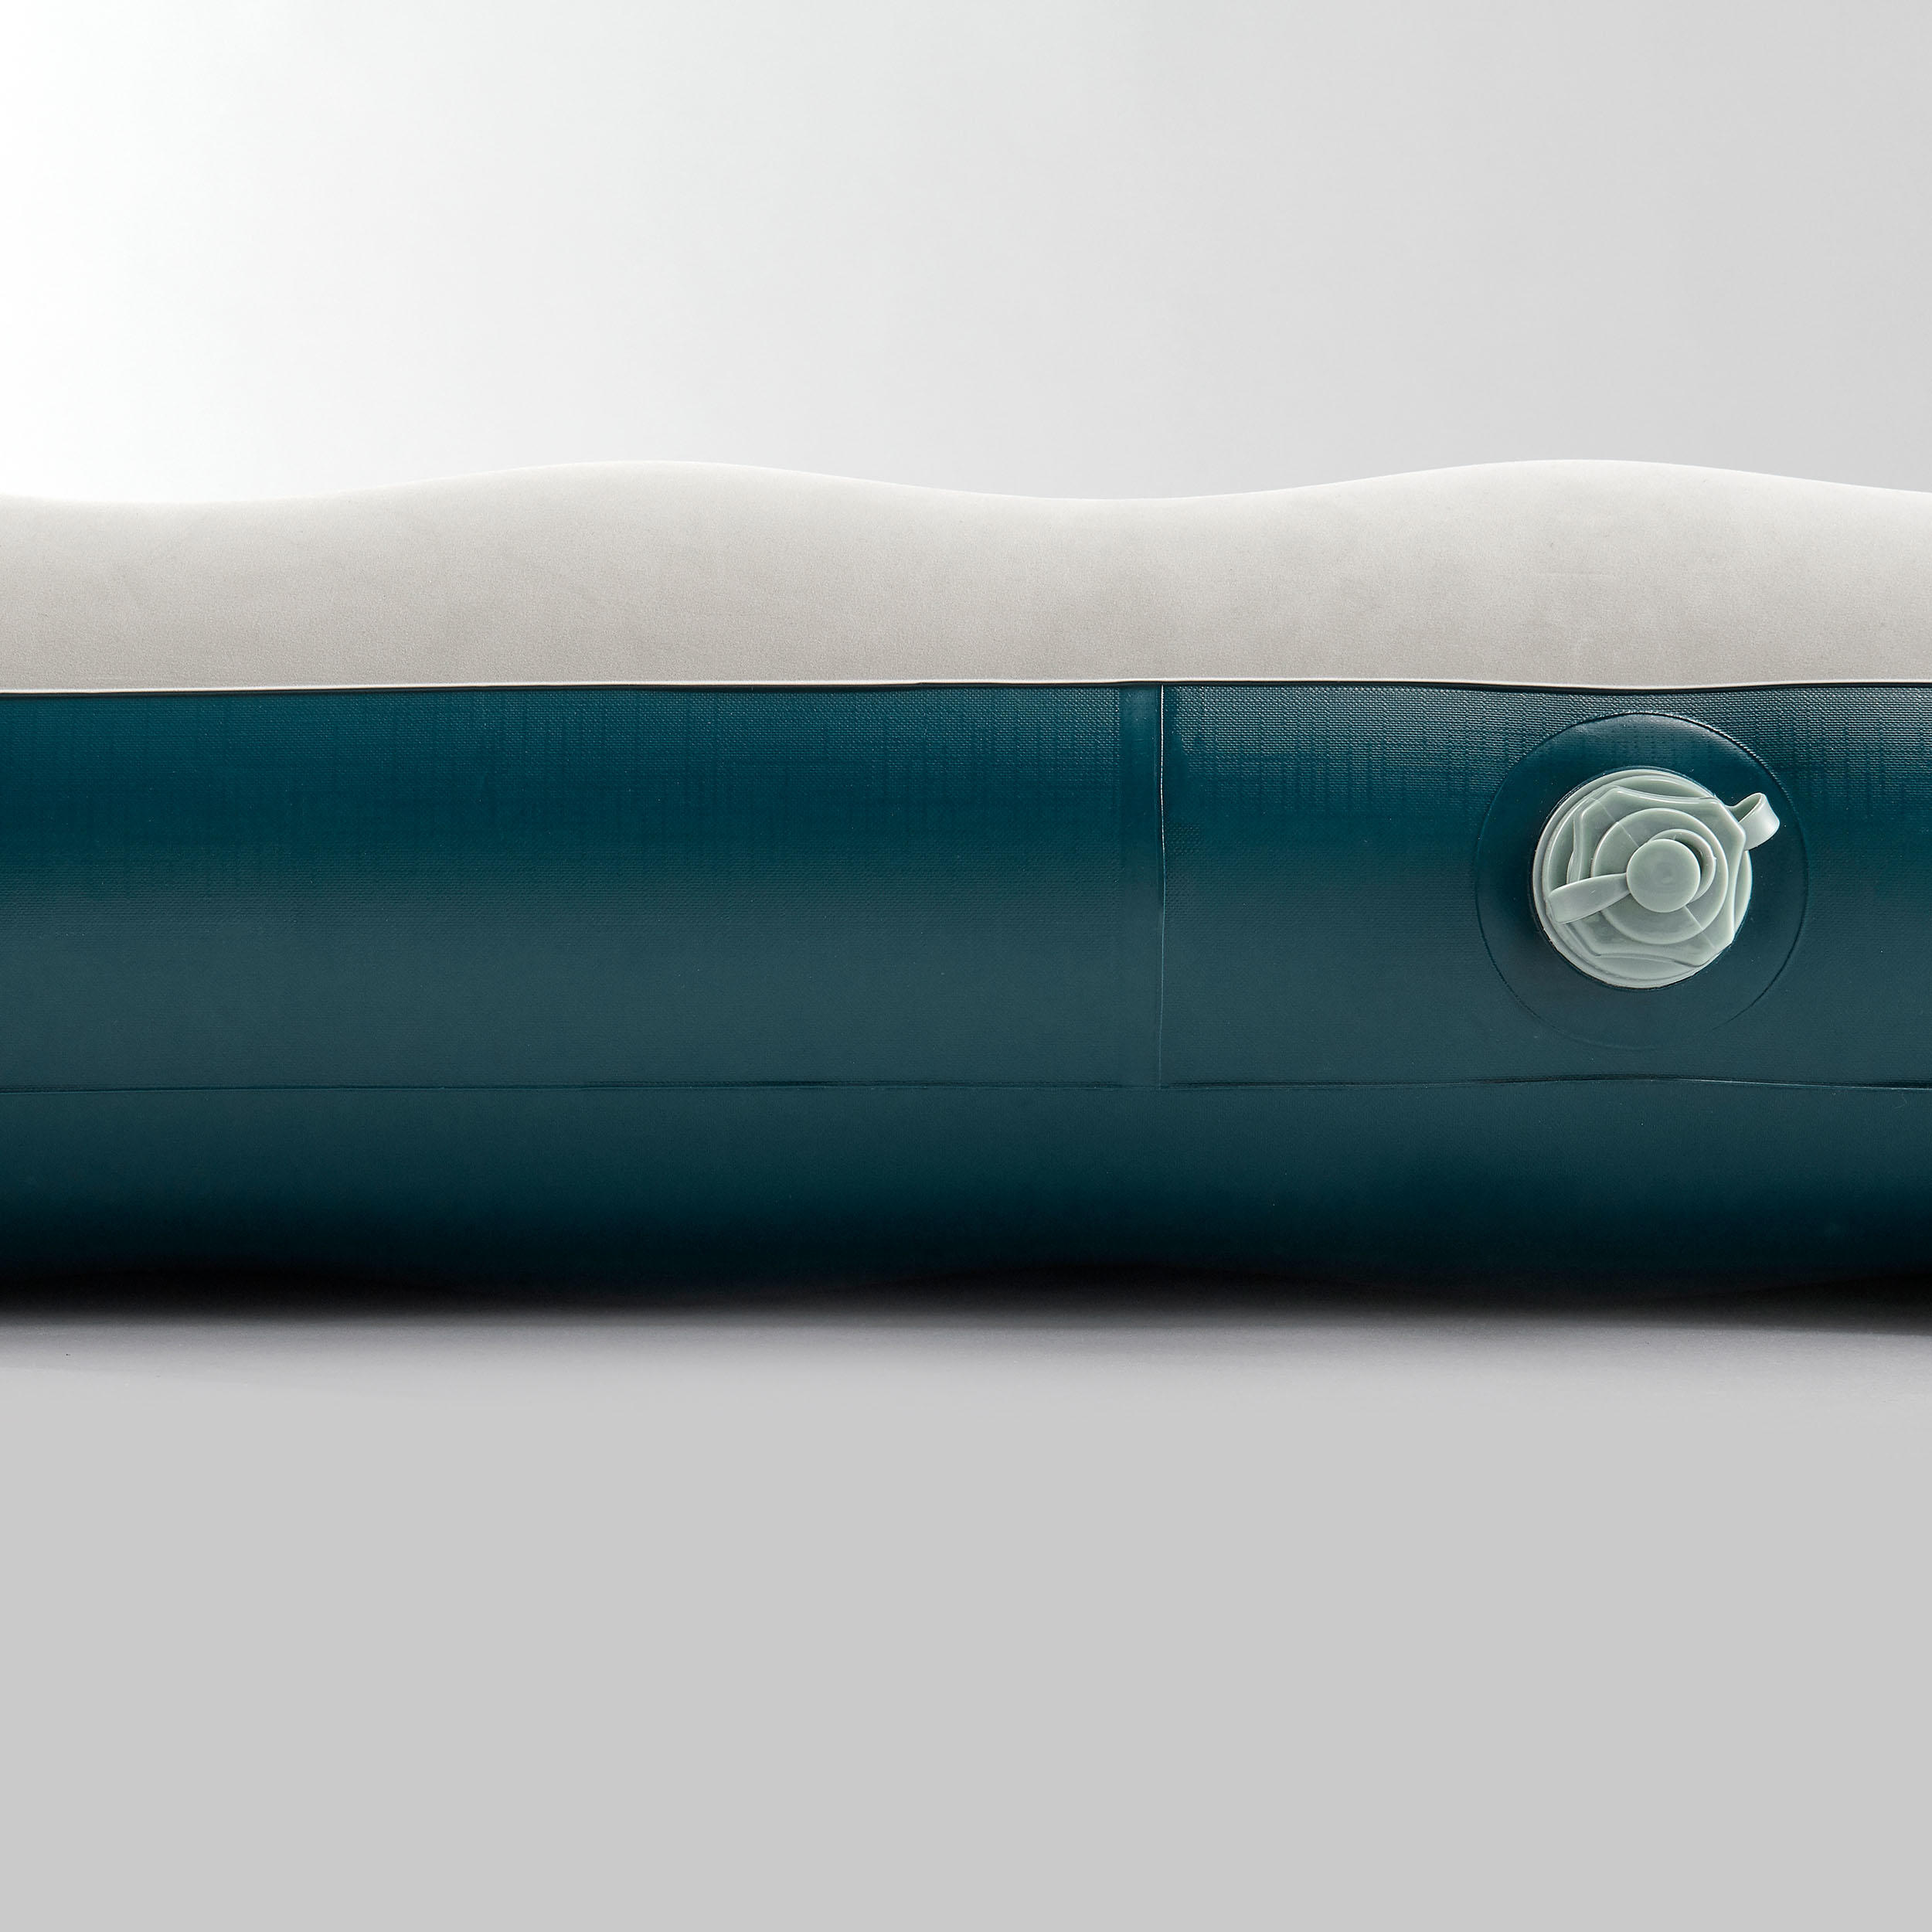 Inflatable Camping Mattress - Air Basic 140 cm - 2 Person 7/8